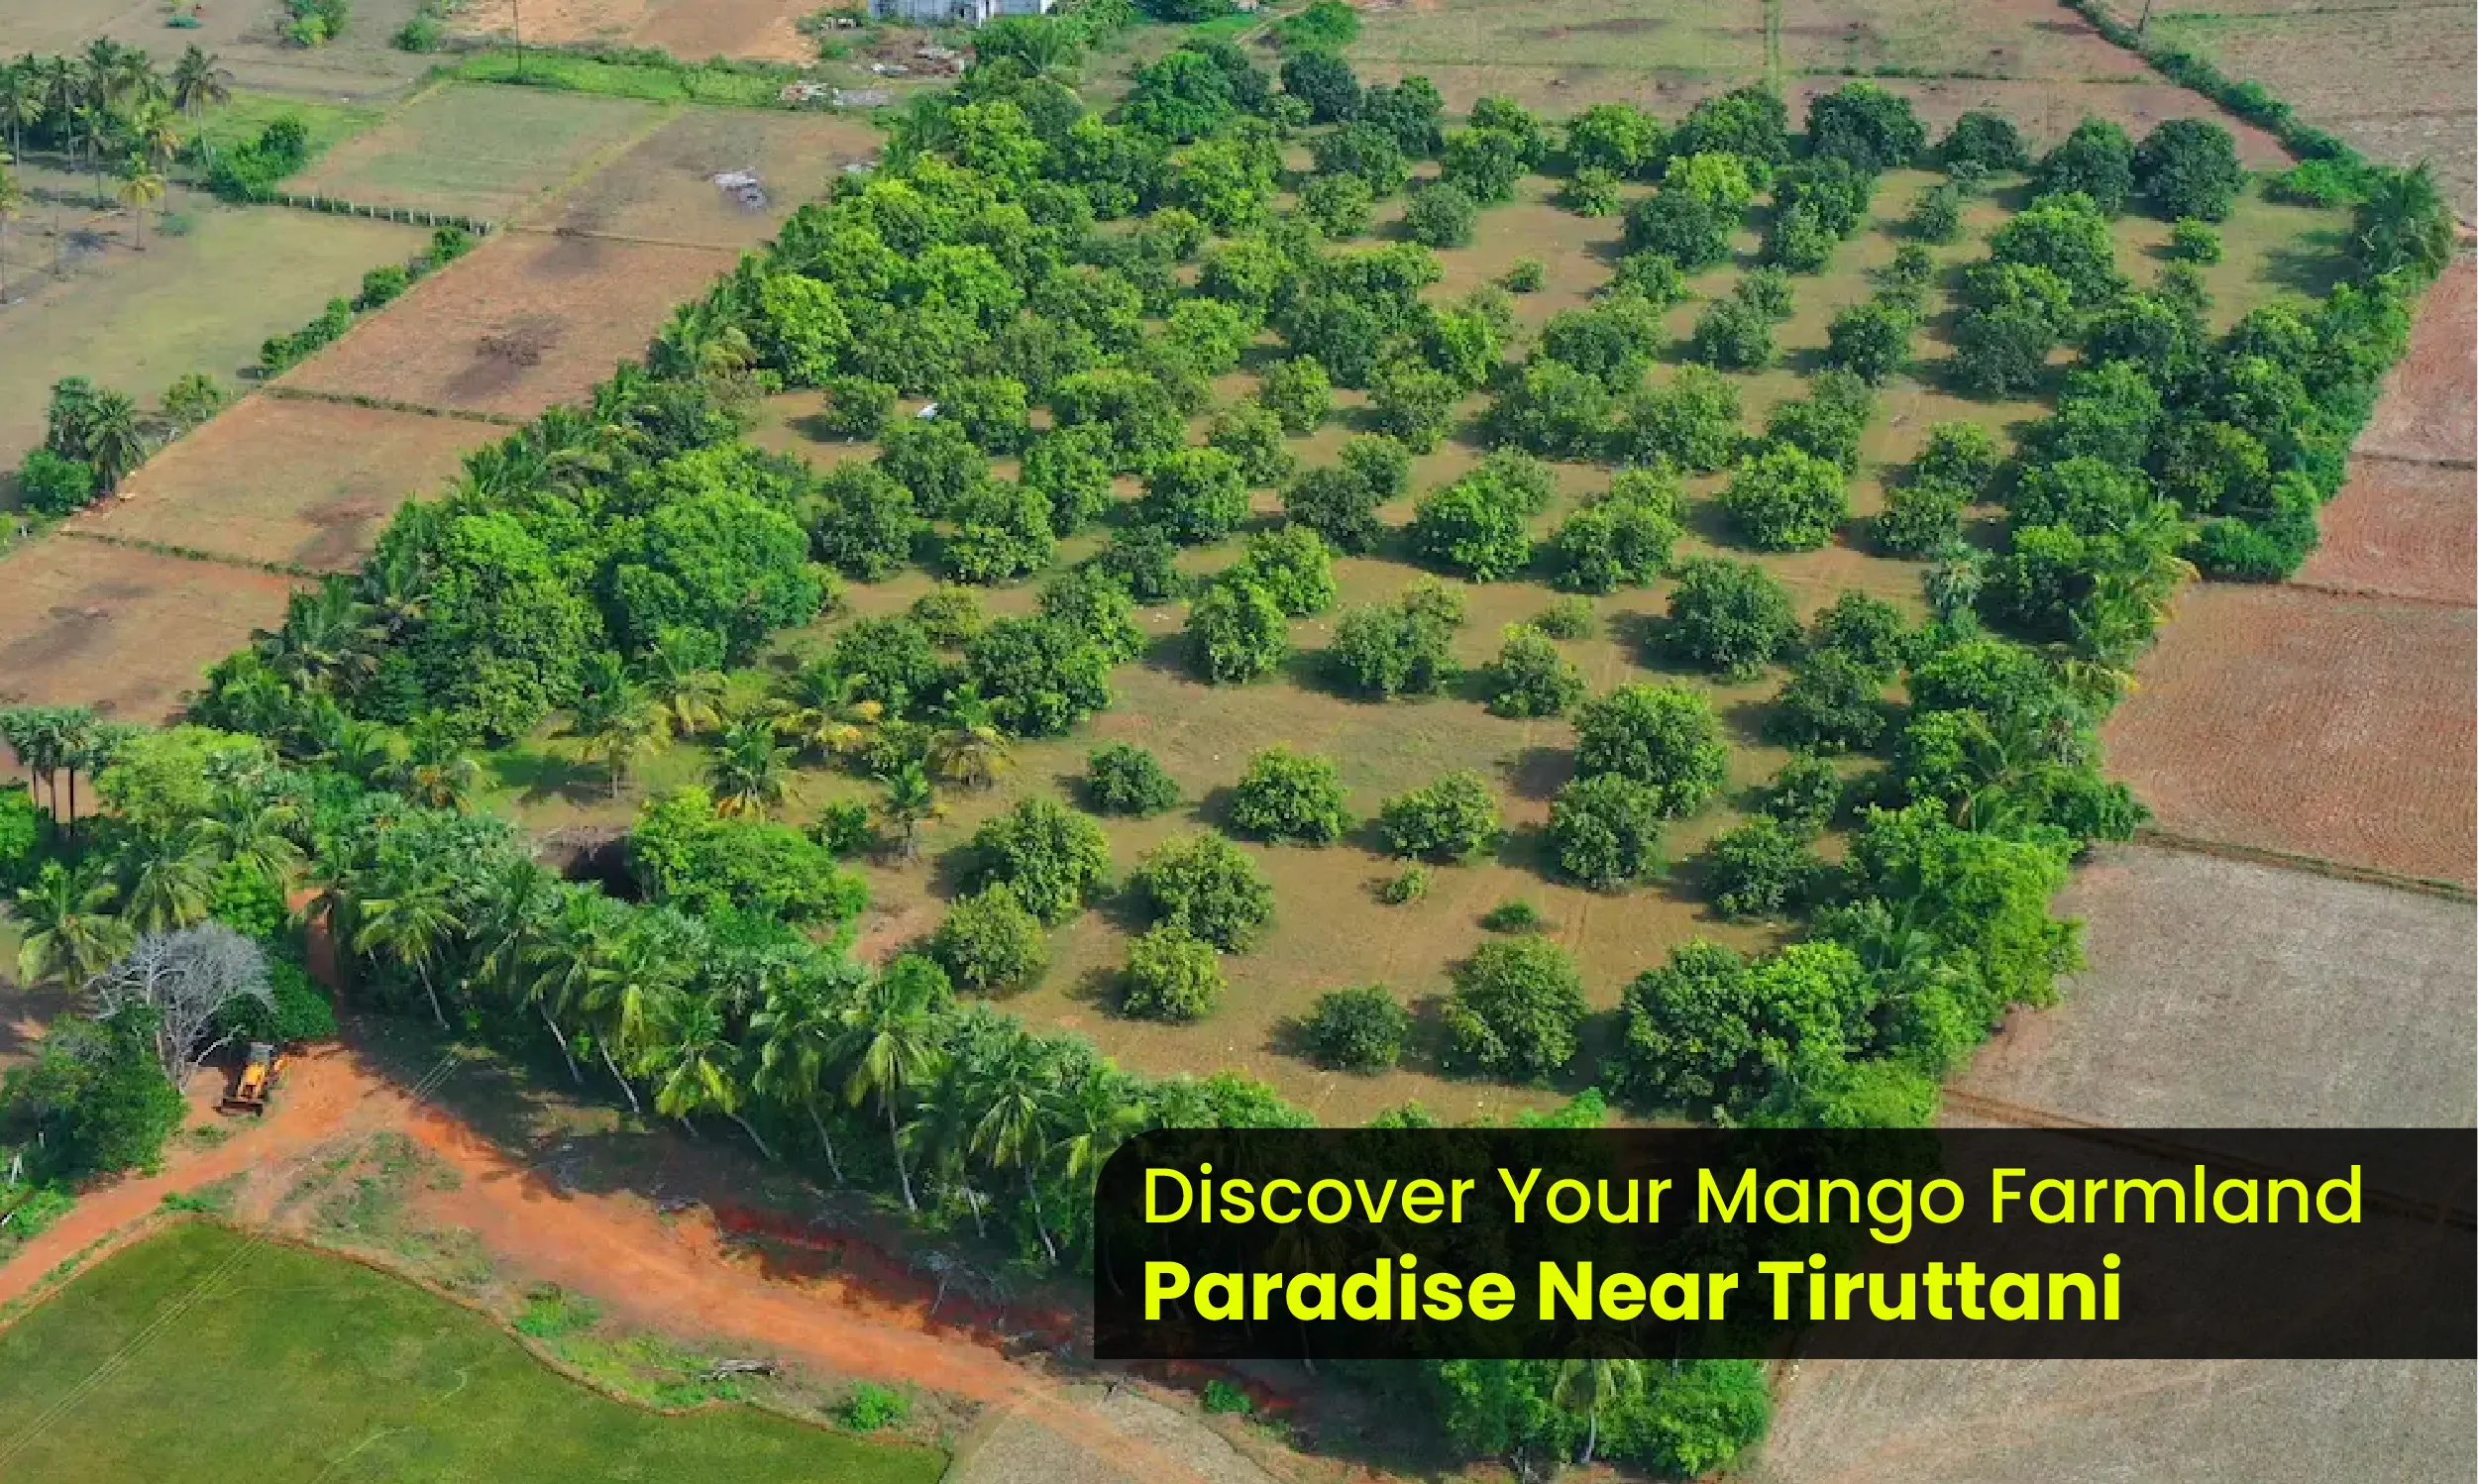 Develop your fantasies by discovering natural farmland and mango forests
                                  